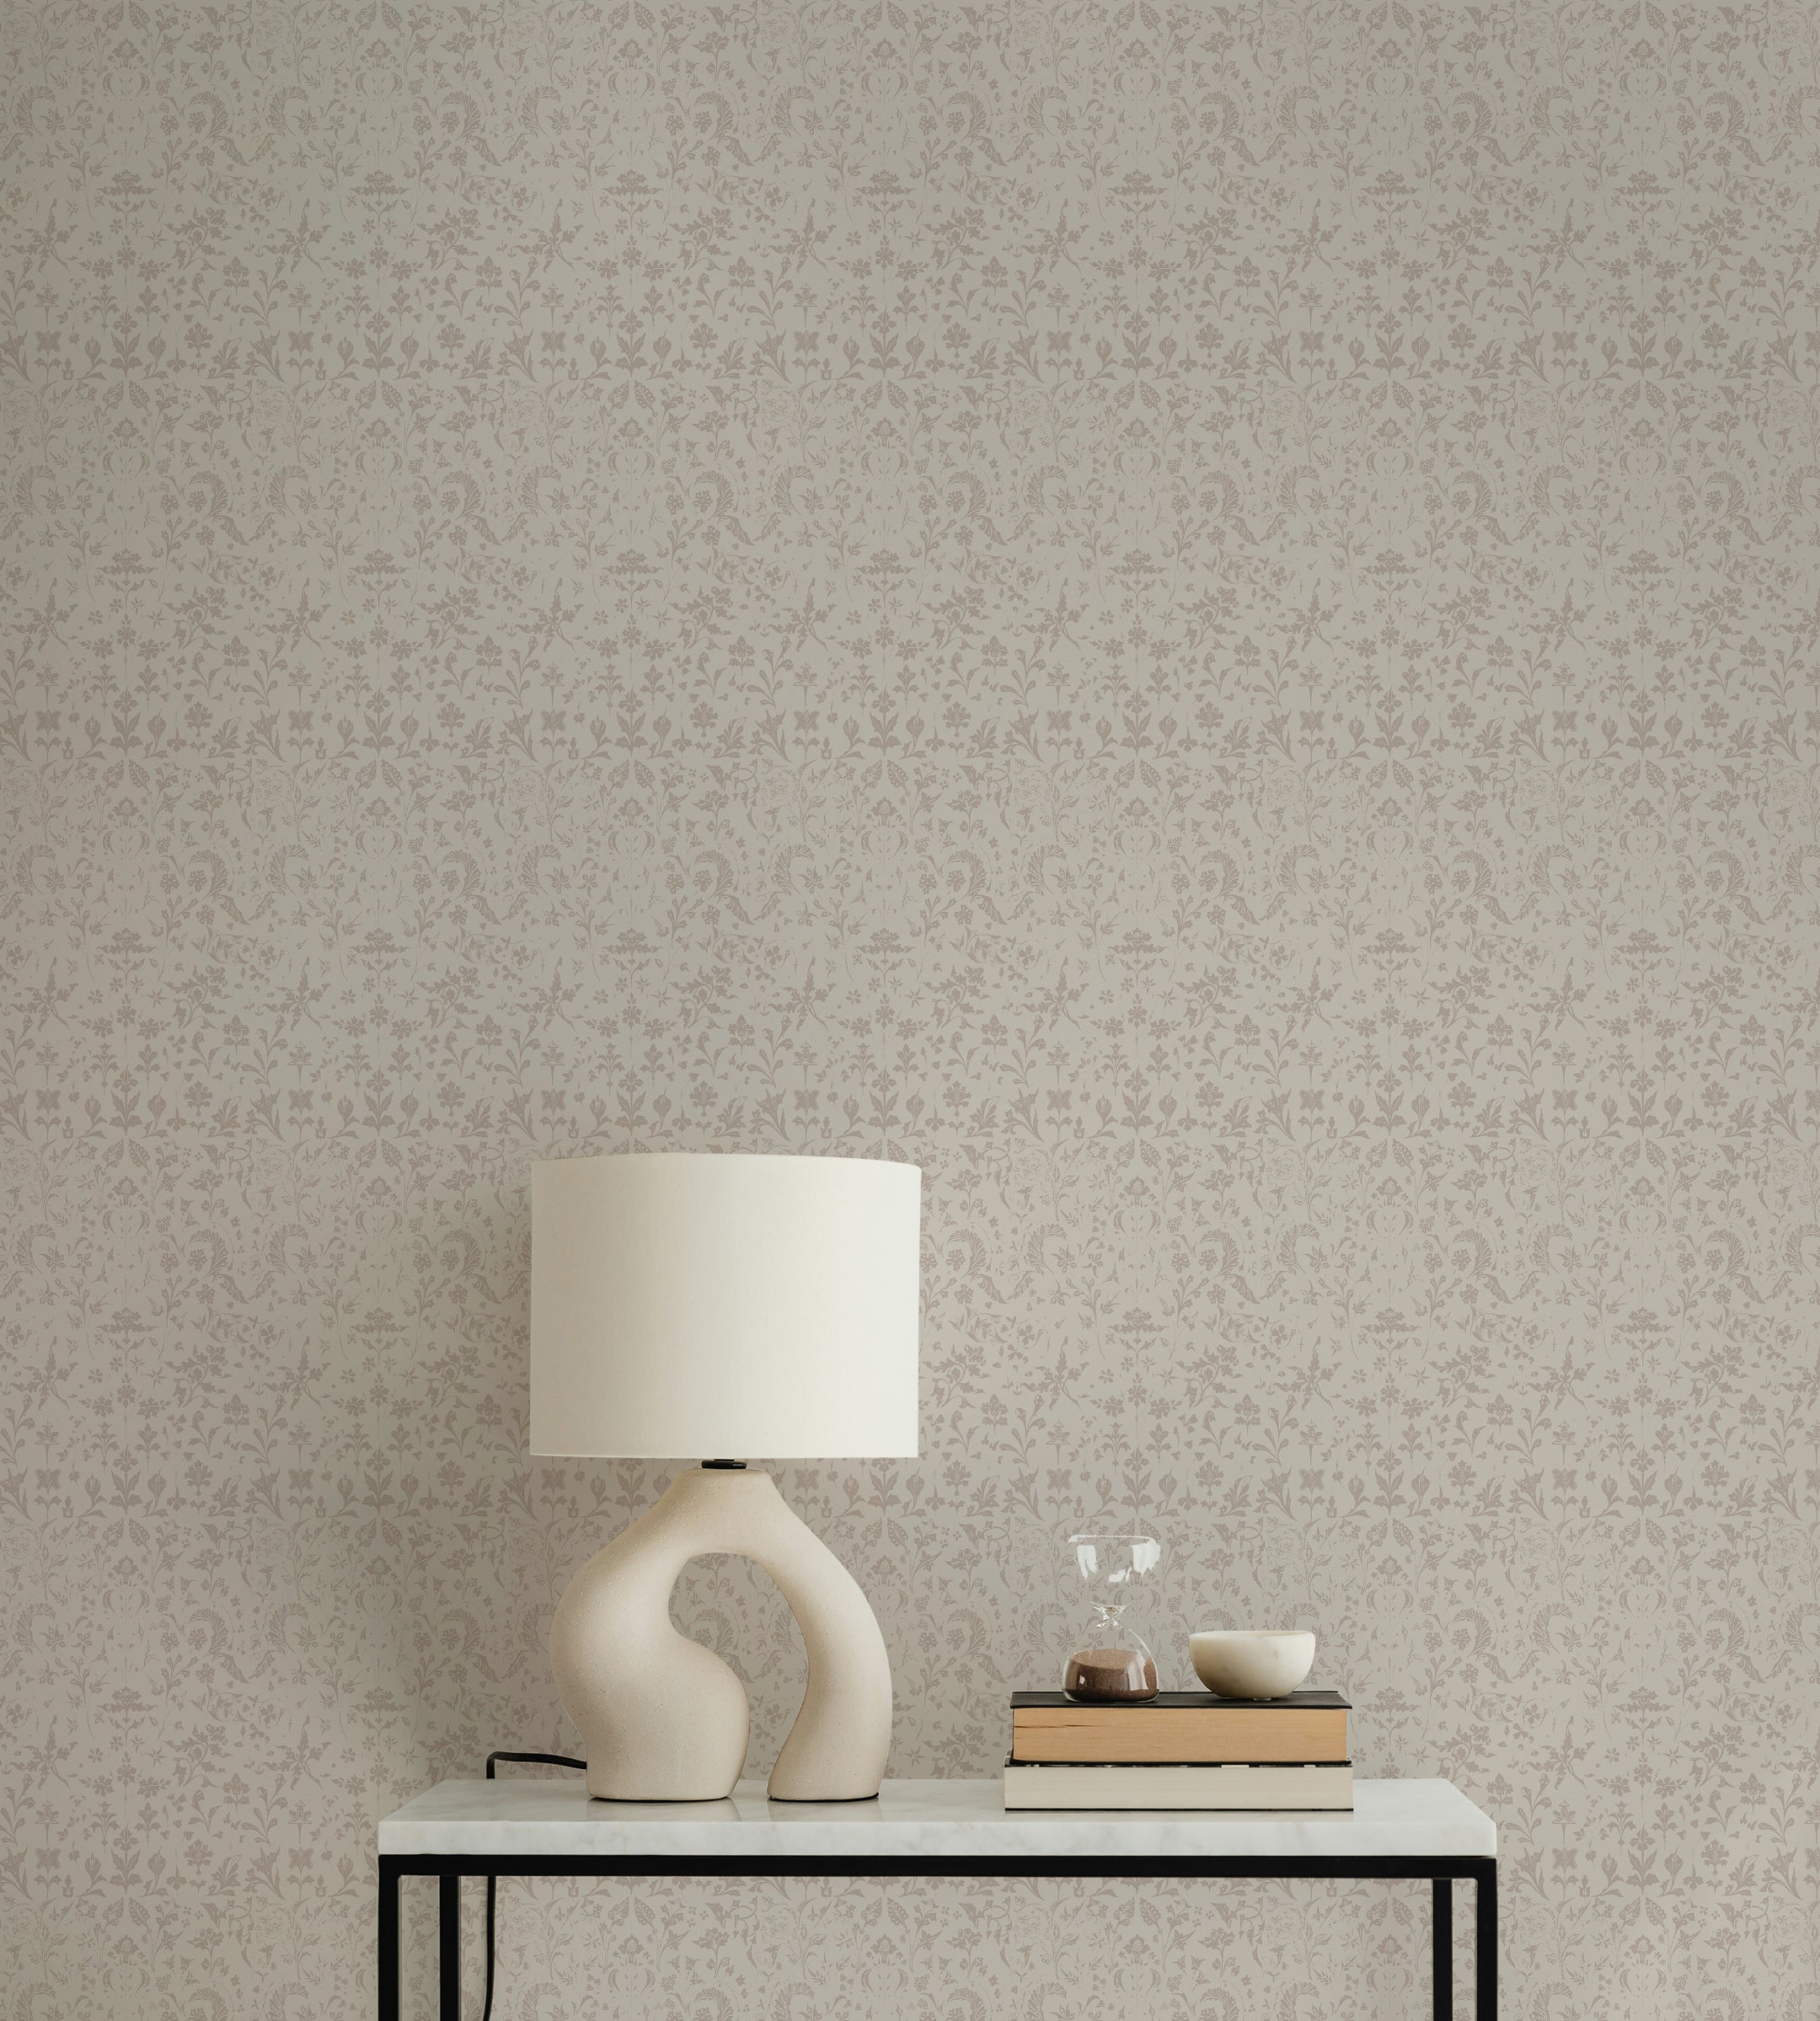 A chic console table with a sculptural white lamp, a stack of books, and decorative items. The wall behind features the Frontenac Wallpaper, presenting a refined and intricate pattern in light taupe, perfect for adding an elegant touch to any space.